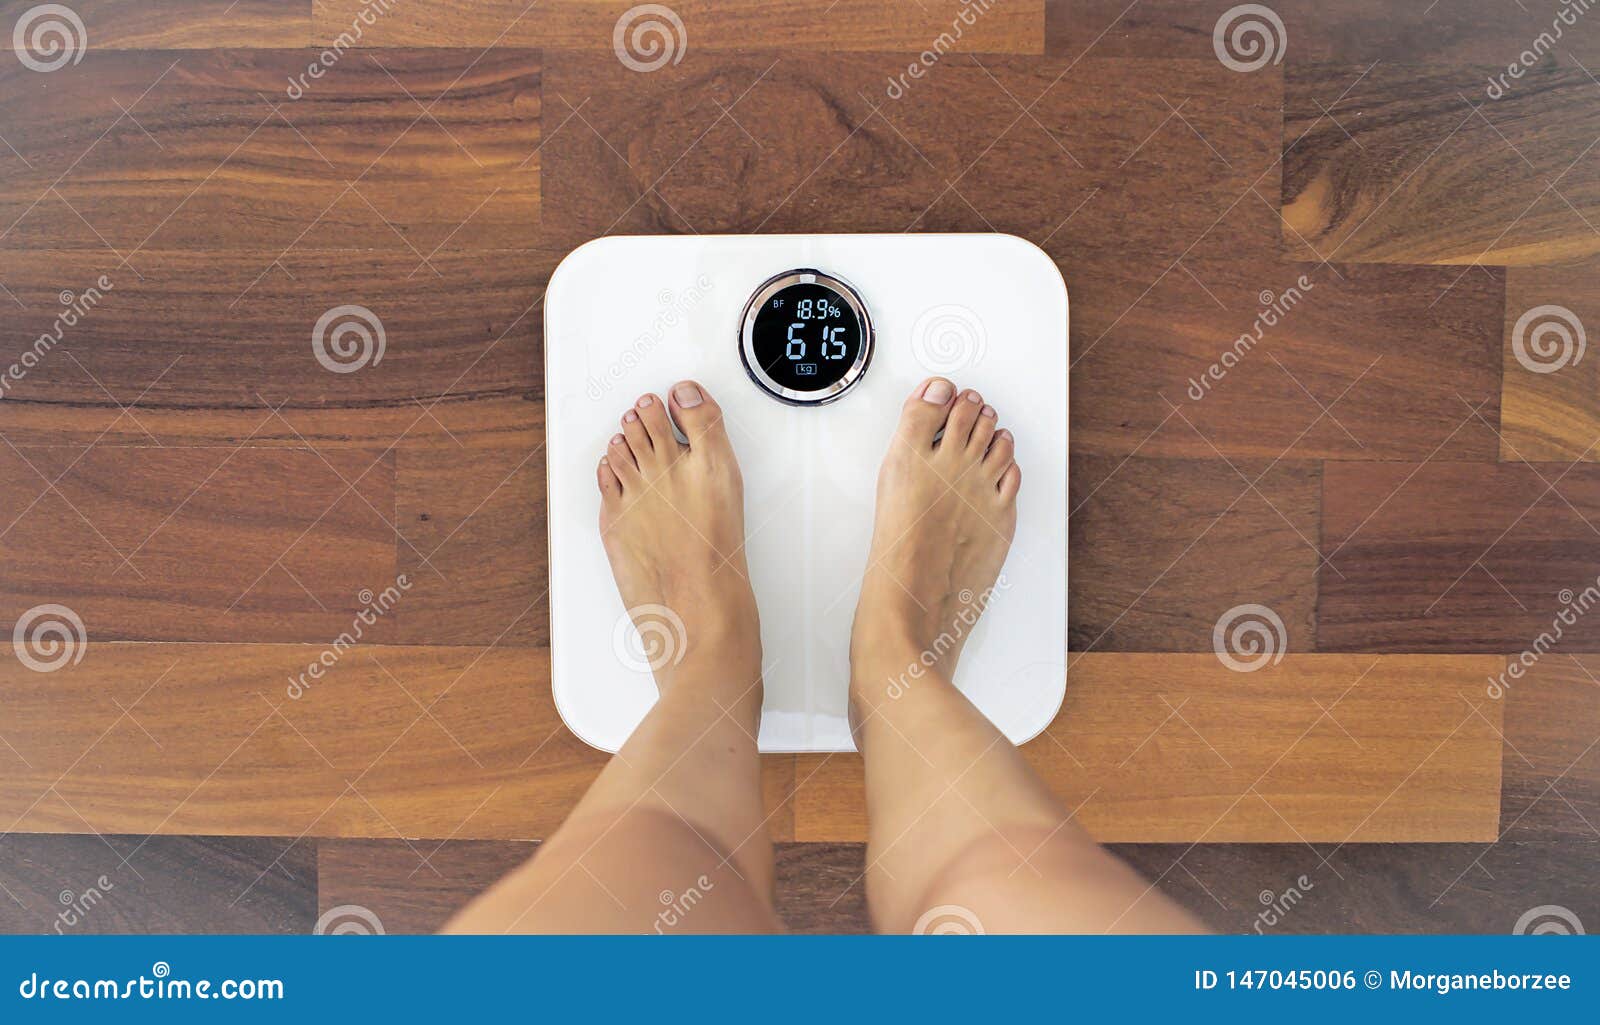 https://thumbs.dreamstime.com/z/woman-standing-digital-scale-body-fat-analyzer-bare-feet-uses-bioelectrical-impedance-bia-to-gauge-amount-147045006.jpg